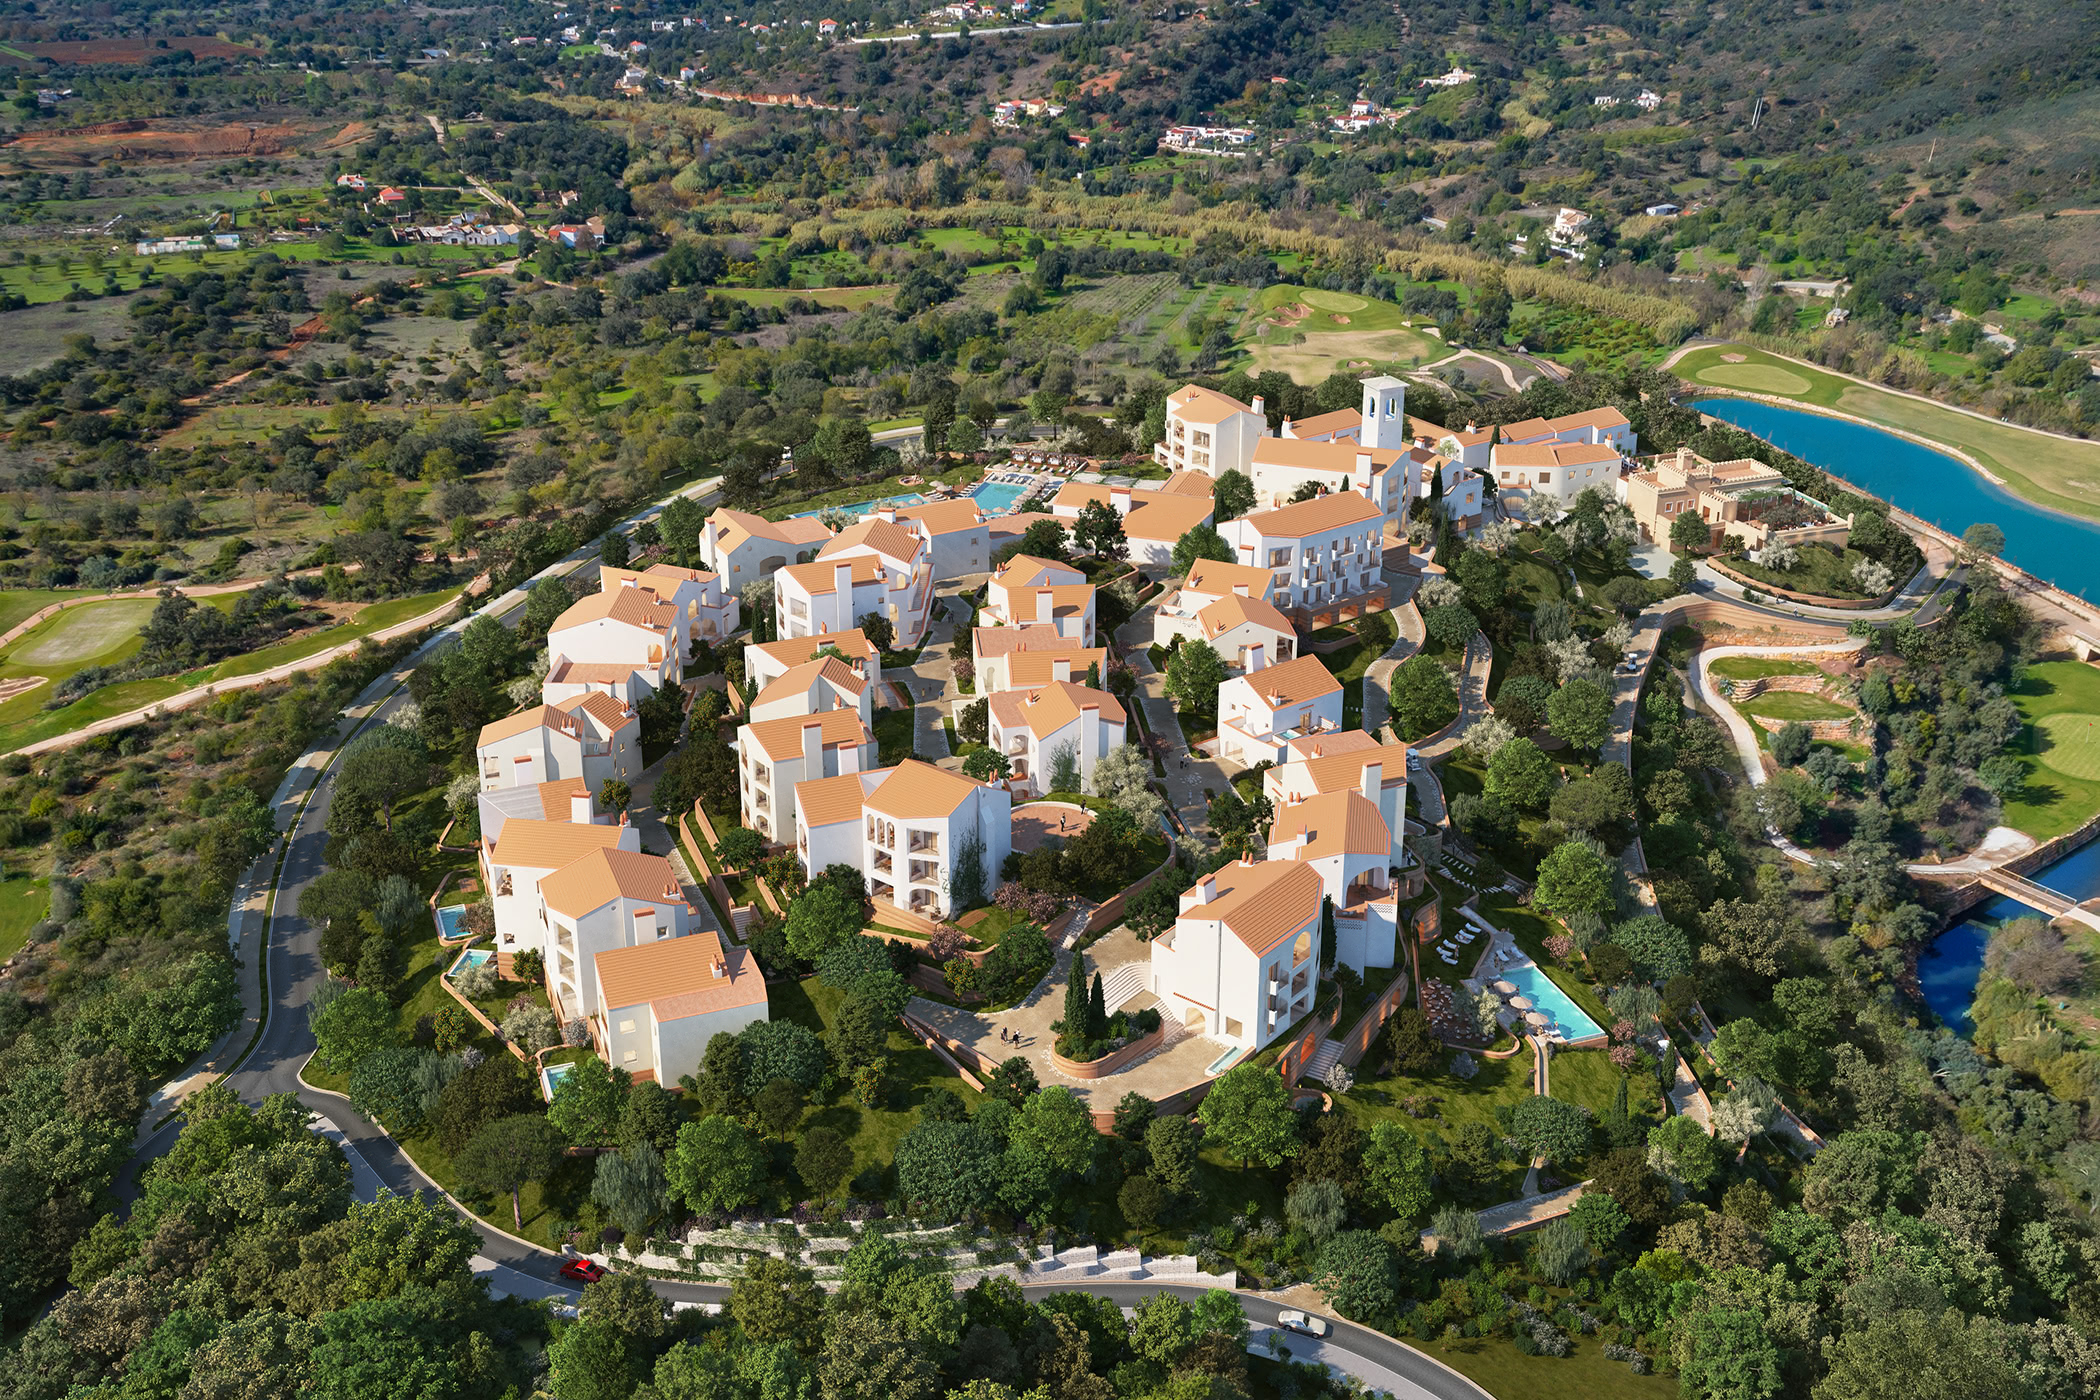 Viceroy at Ombria Algarve From Above